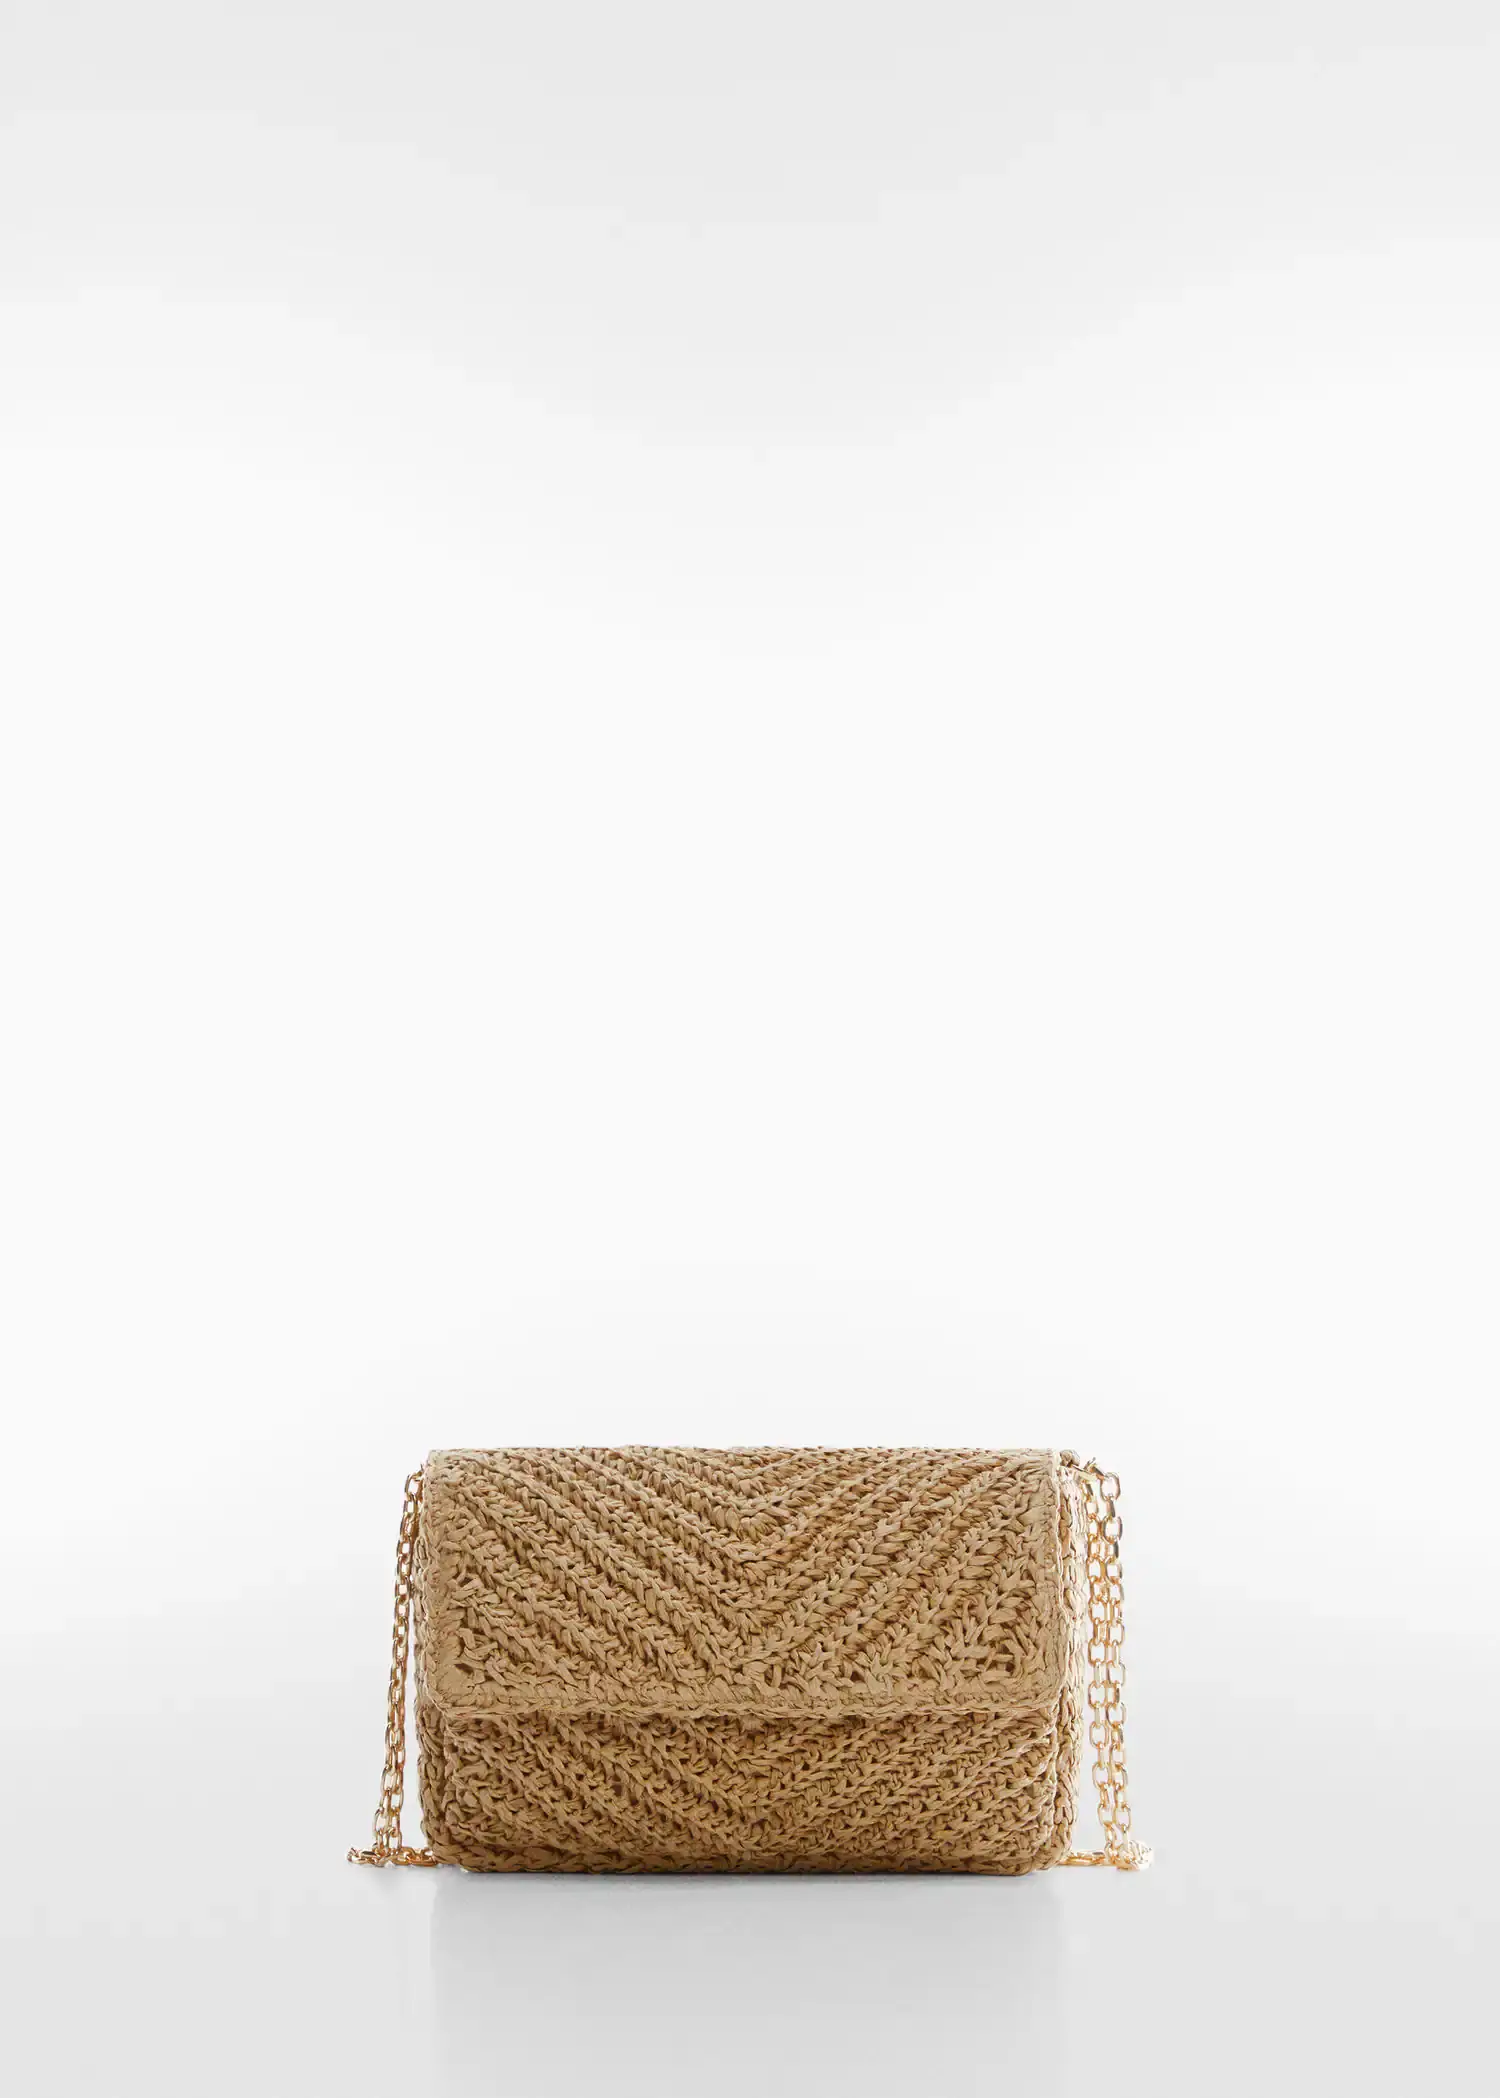 Mango Natural fiber bag with flap. a tan purse sitting on top of a white table. 